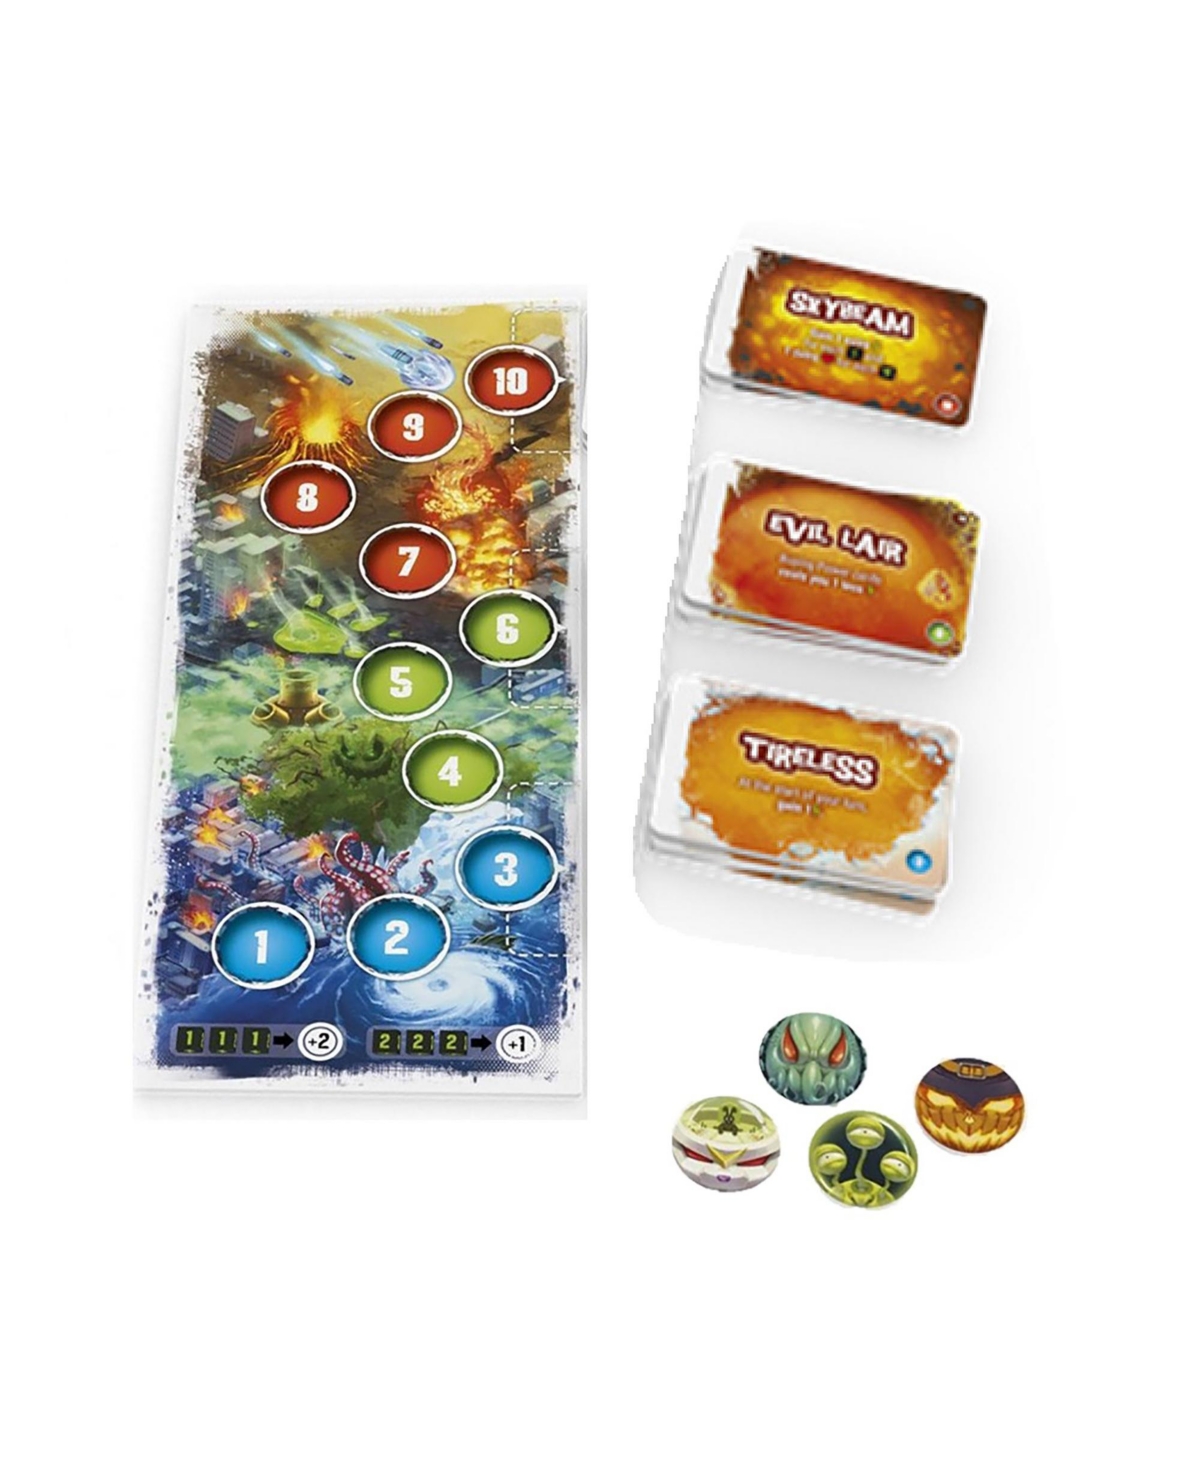 Shop Iello King Of Tokyo Micro Expansion Wickedness Gauge  Games In Multi